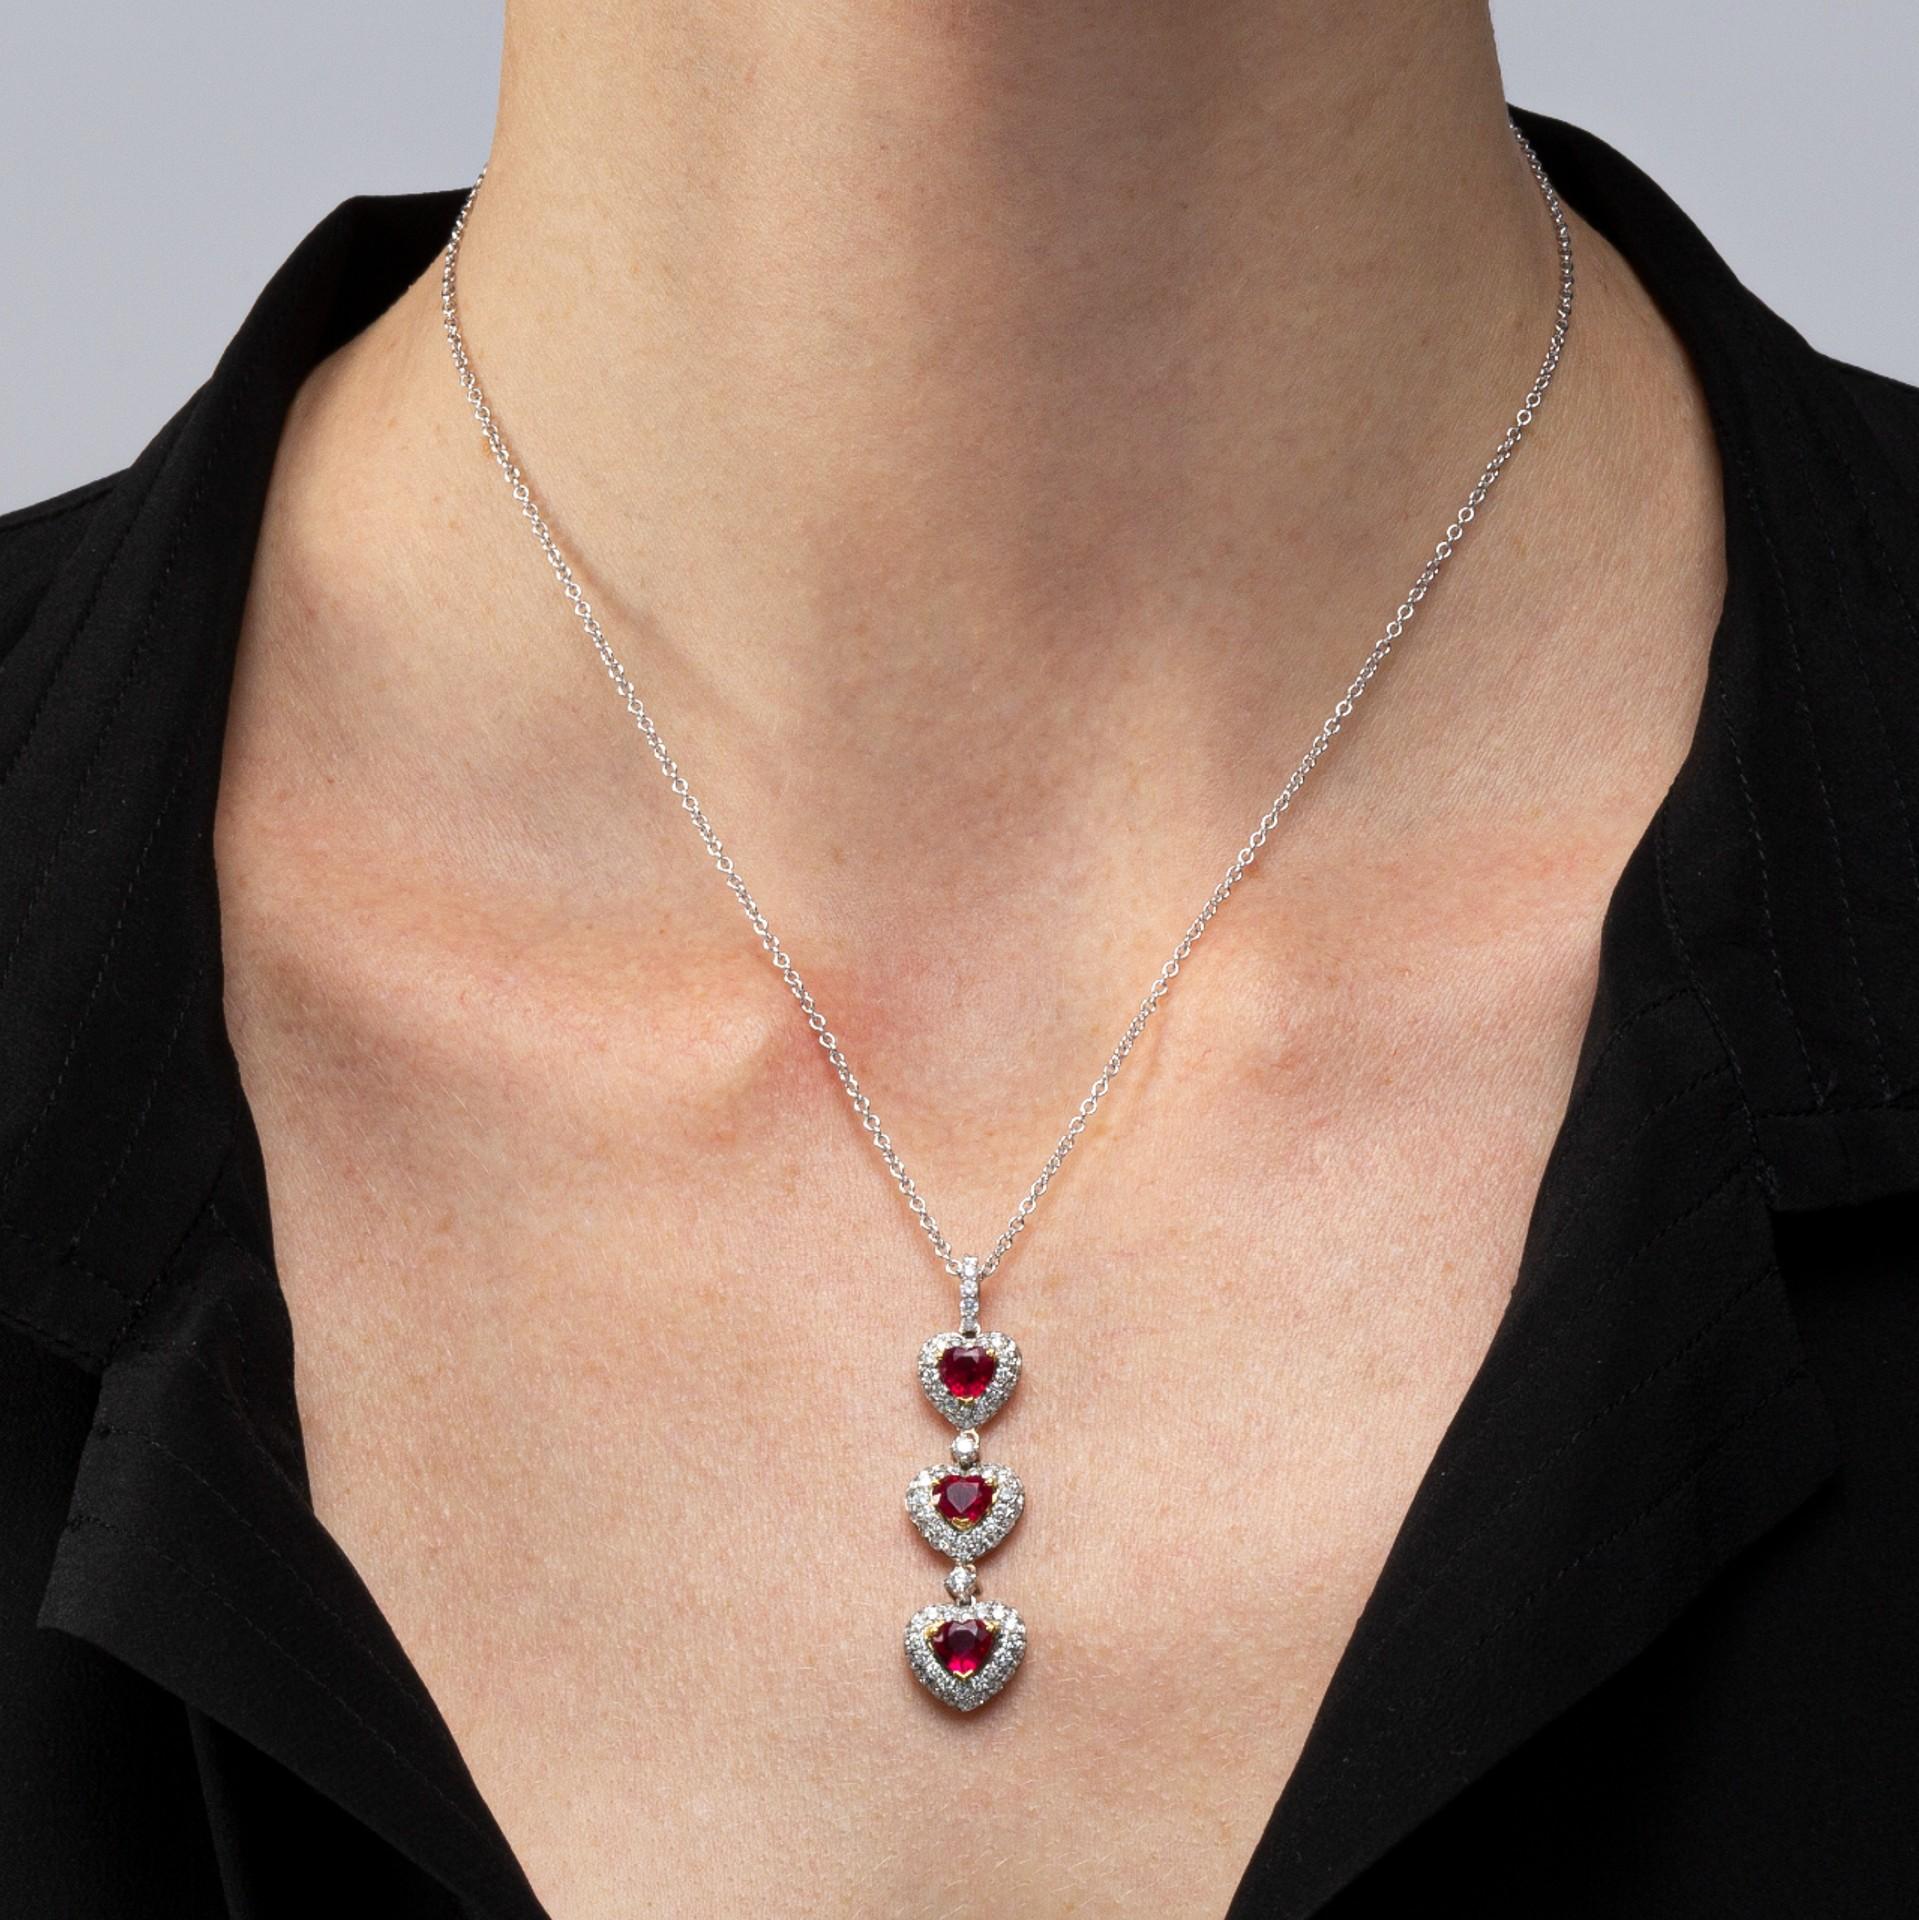 Alex Jona design collection, hand crafted in Italy, 18 karat white gold pendant centering three heart cut rubies weighing 2.88 carats in total surrounded by 0.89 carats of white diamonds, F color, VVS1, suspending from a 16.5 inch long 18 karat